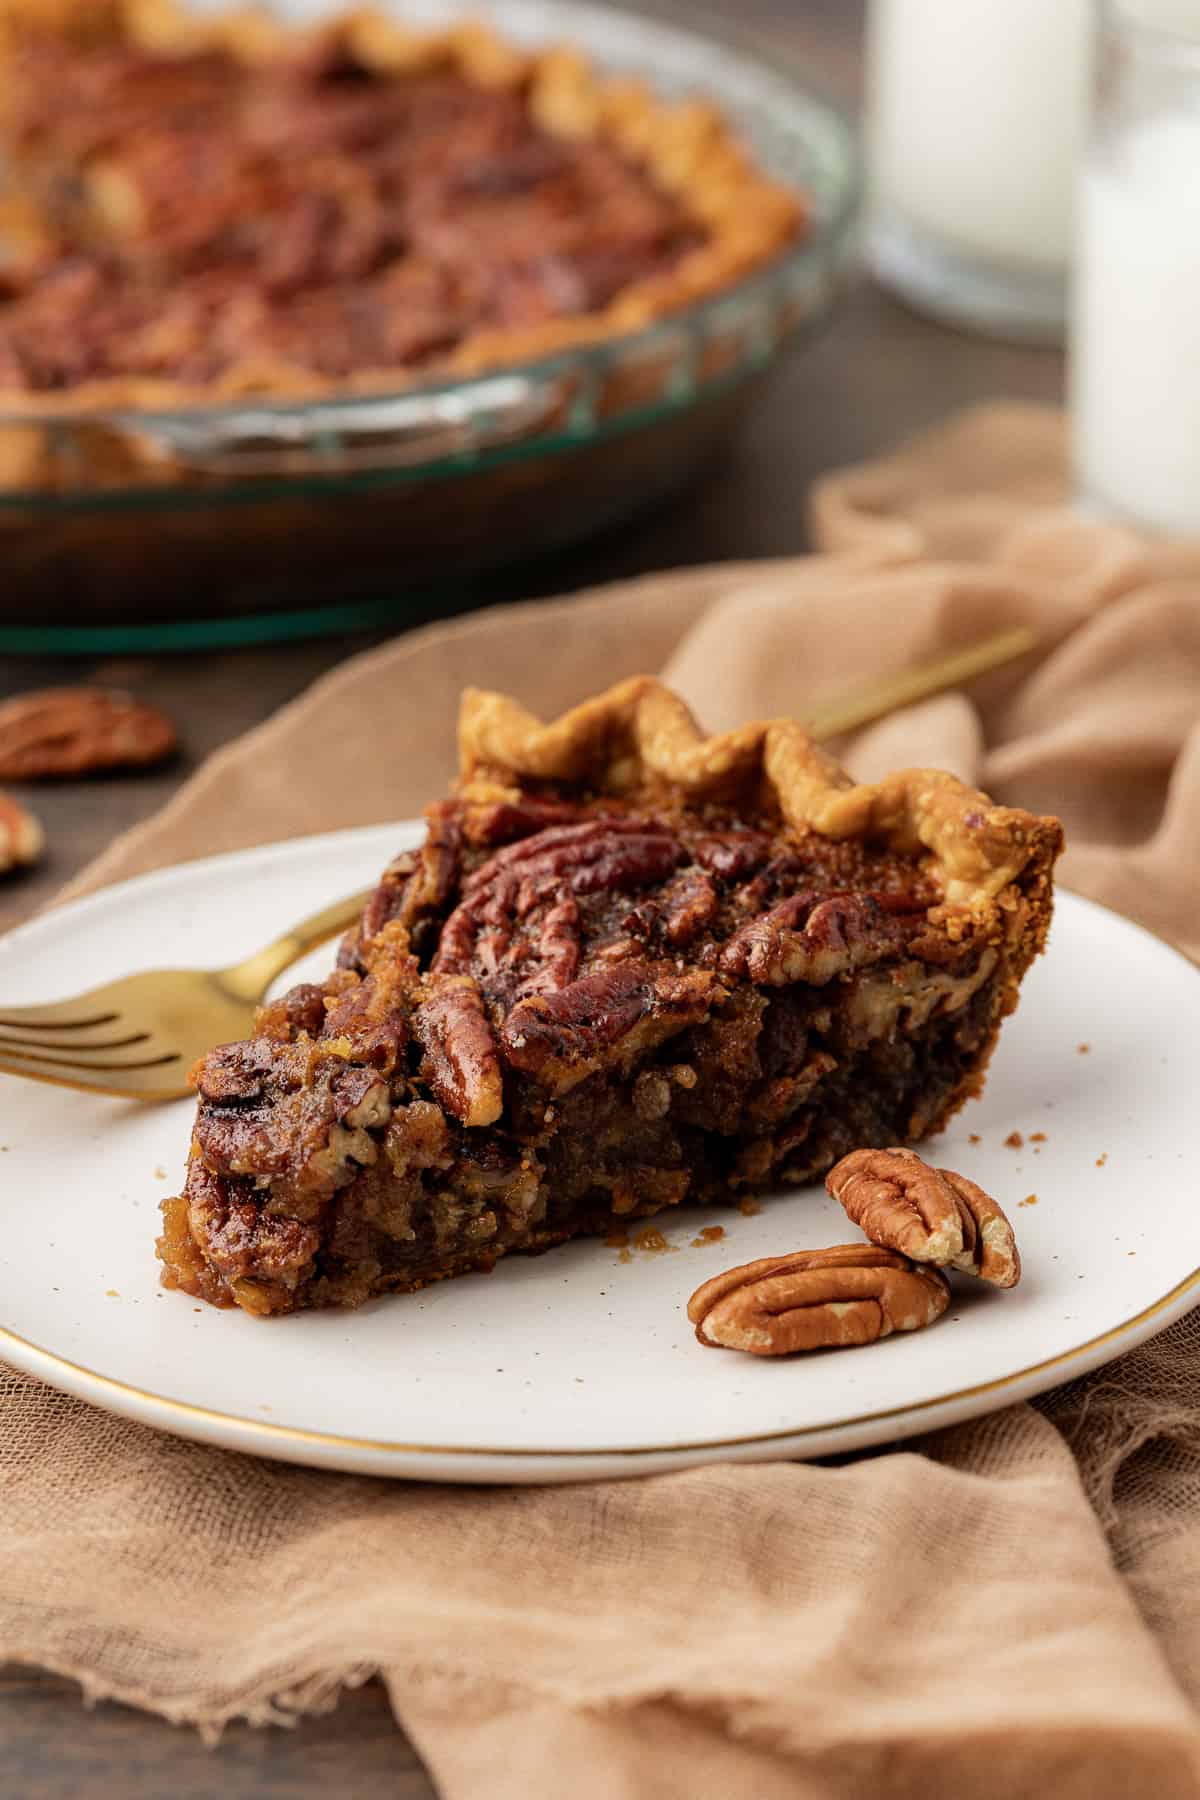 a slice of pecan pie on a white plate with a fork and whole pecans on either side of it, sitting on top of a tan towel on a wood surface, with the glass pie dish full of pie in the background and more pecans scattered around